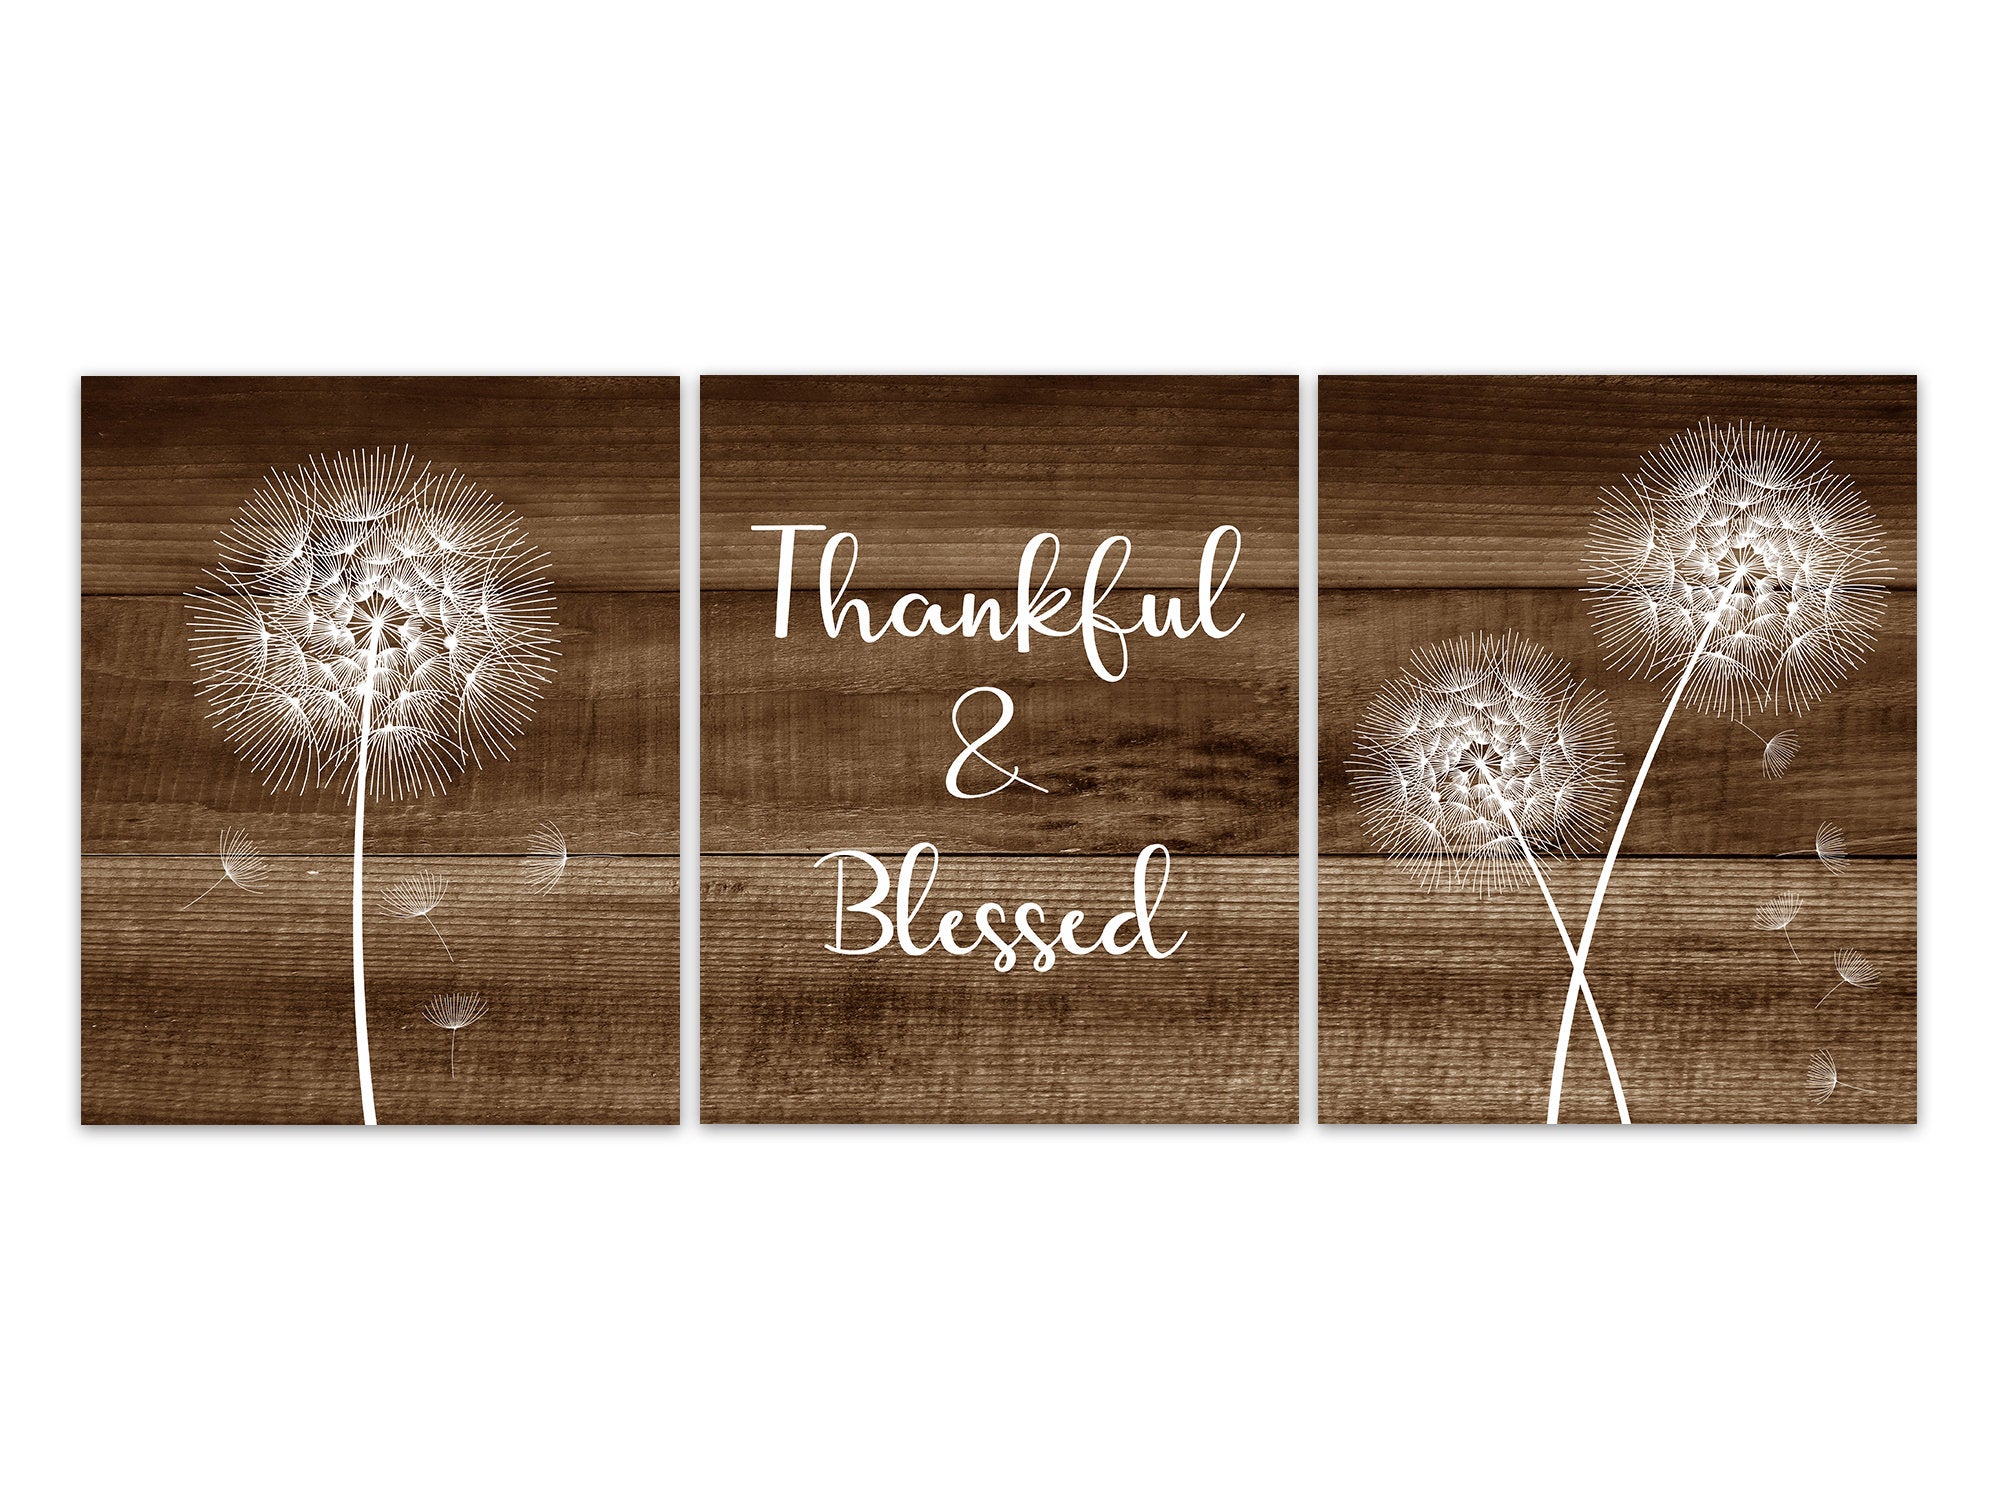 Thankful and Blessed Sign, Wall Art Prints or Canvas, Brown Home Decor, Blessing Signs, Dining Room Decor, Dandelion Kitchen Art - HOME576